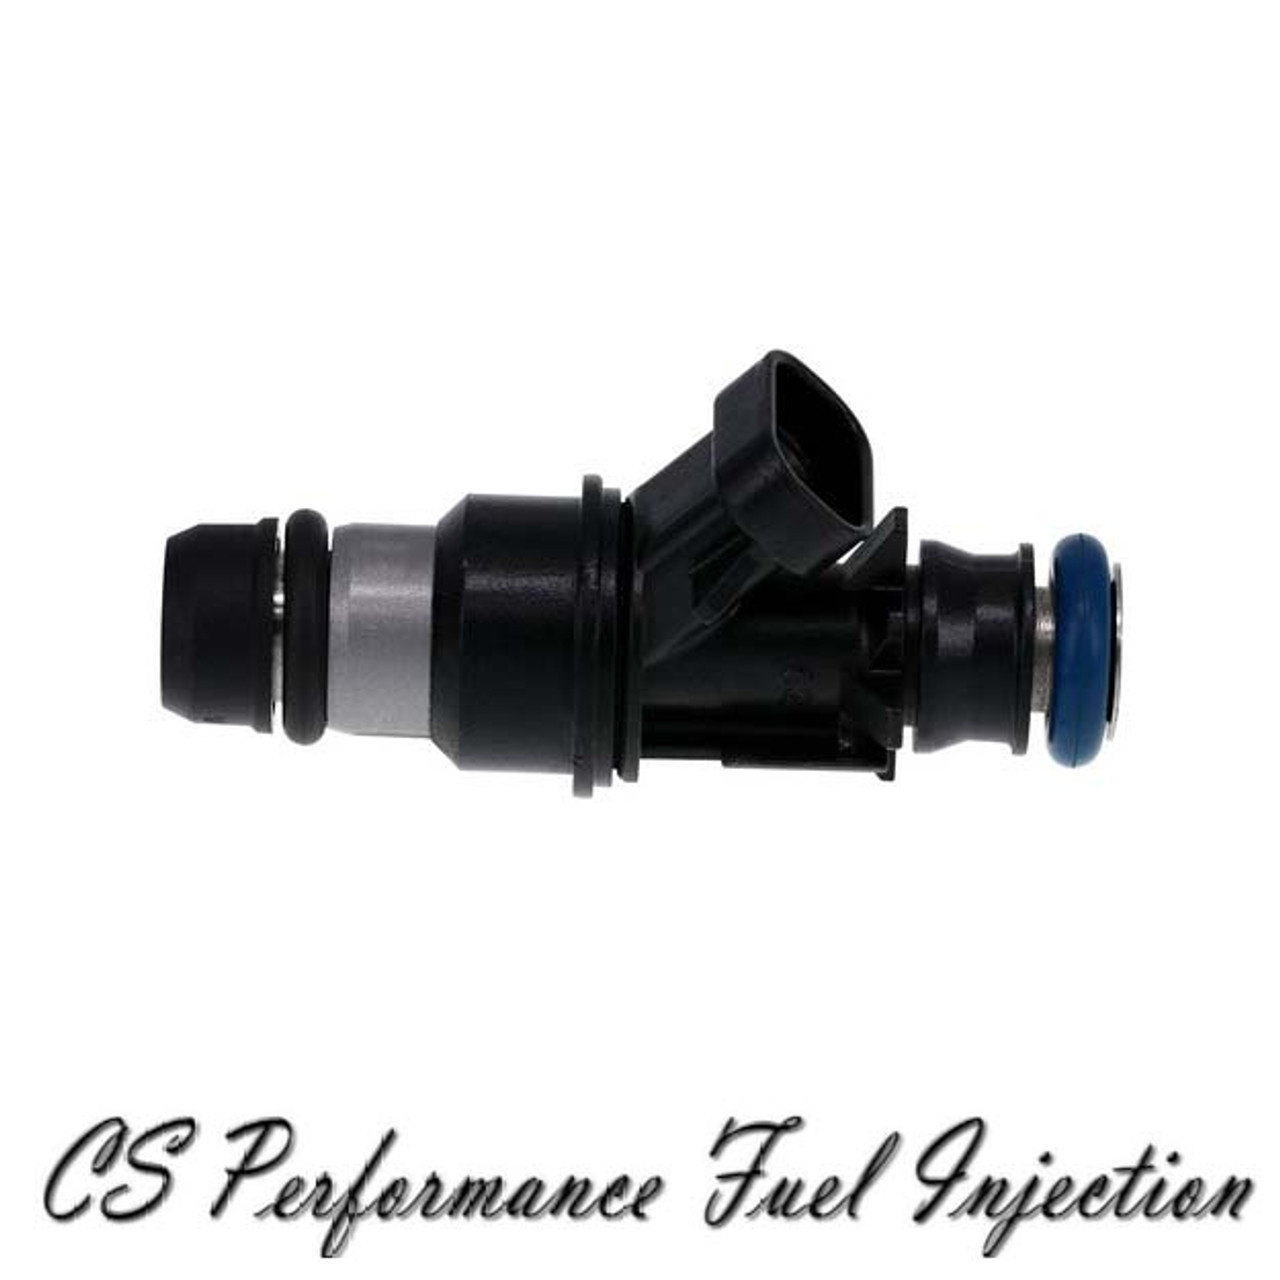 Delphi Fuel Injector for 01-06 Cadillac Chevy GMC 4.8 5.3 6.0 V8